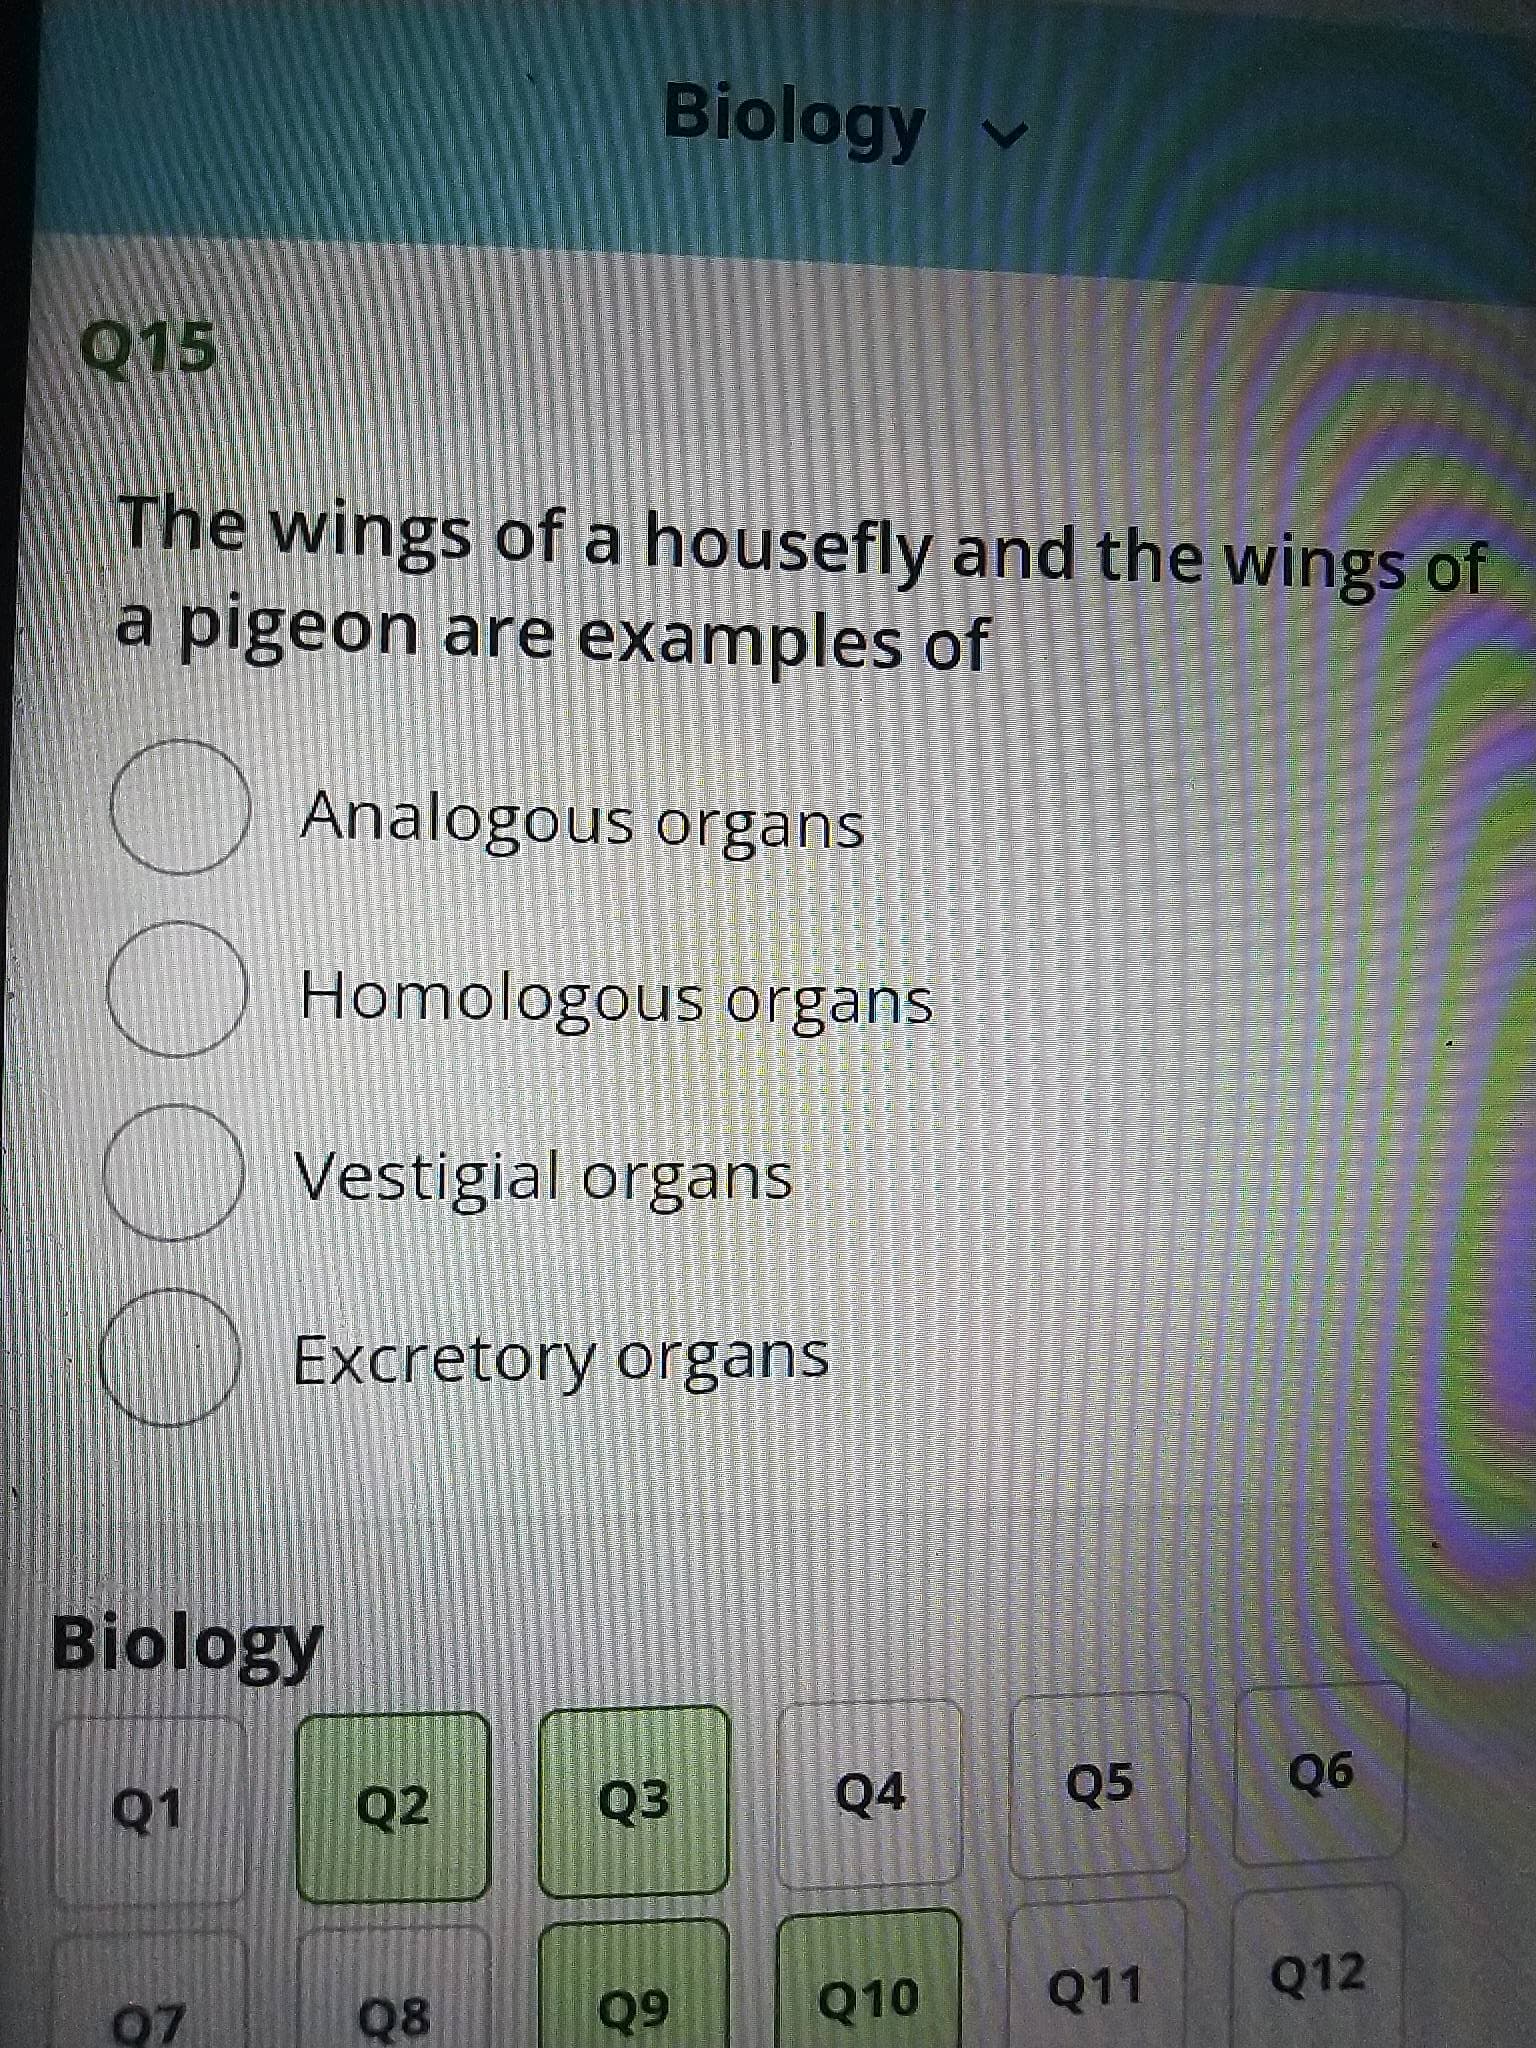 Biology ♥
The wings of a housefly and the wings of
a pigeon are examples of
Analogous organs
Homologous organs
Vestigial organs
Excretory organs
Biology
Q2
Q4
Q5
90
60
Q10
Q11
Q12
Q8
